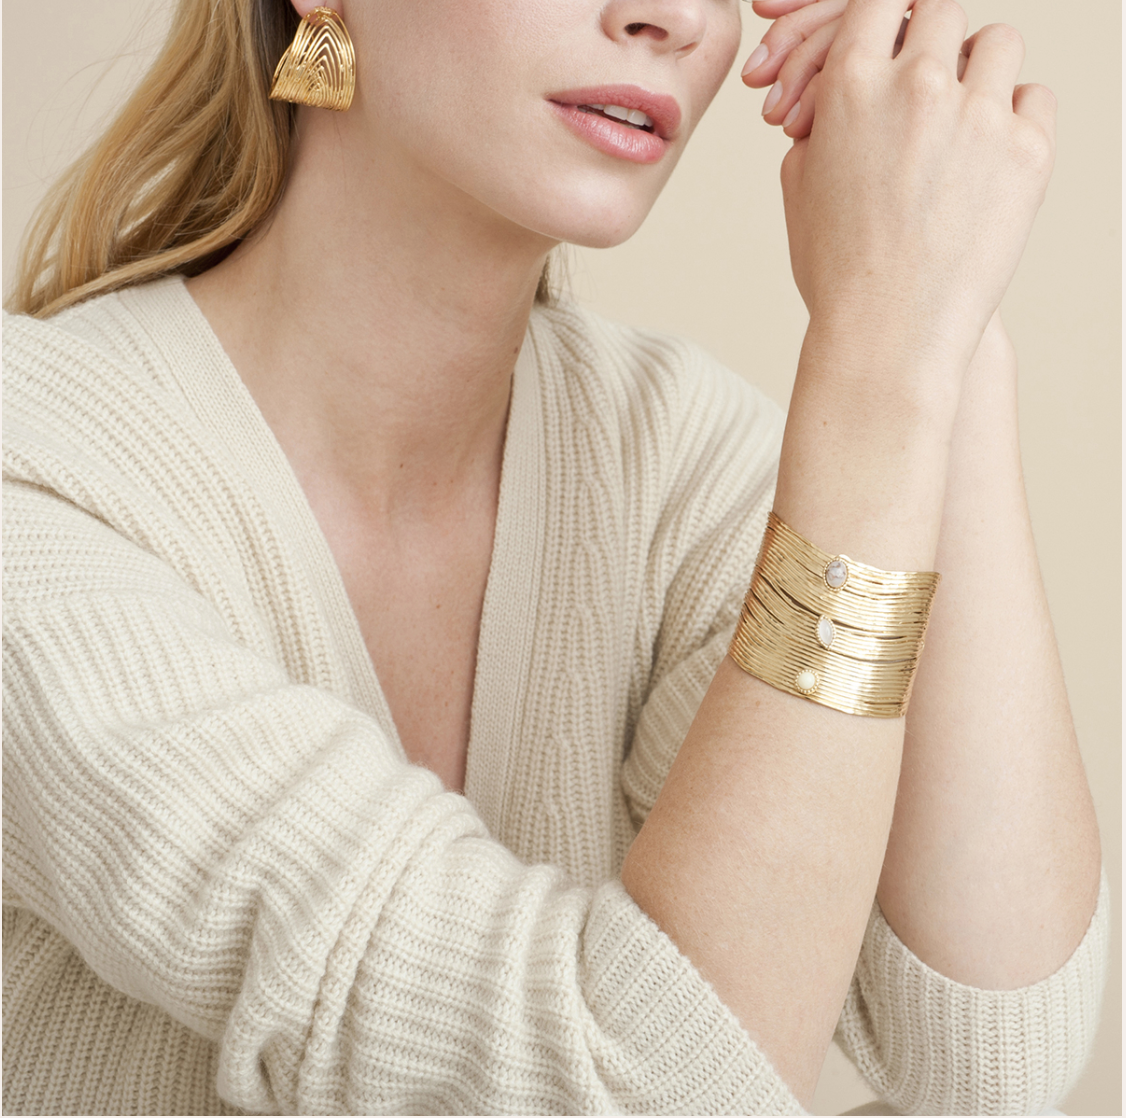 Gas Bijoux Wave Earrings Gold - Premium earrings from Marina St Barth - Just $205! Shop now at Marina St Barth